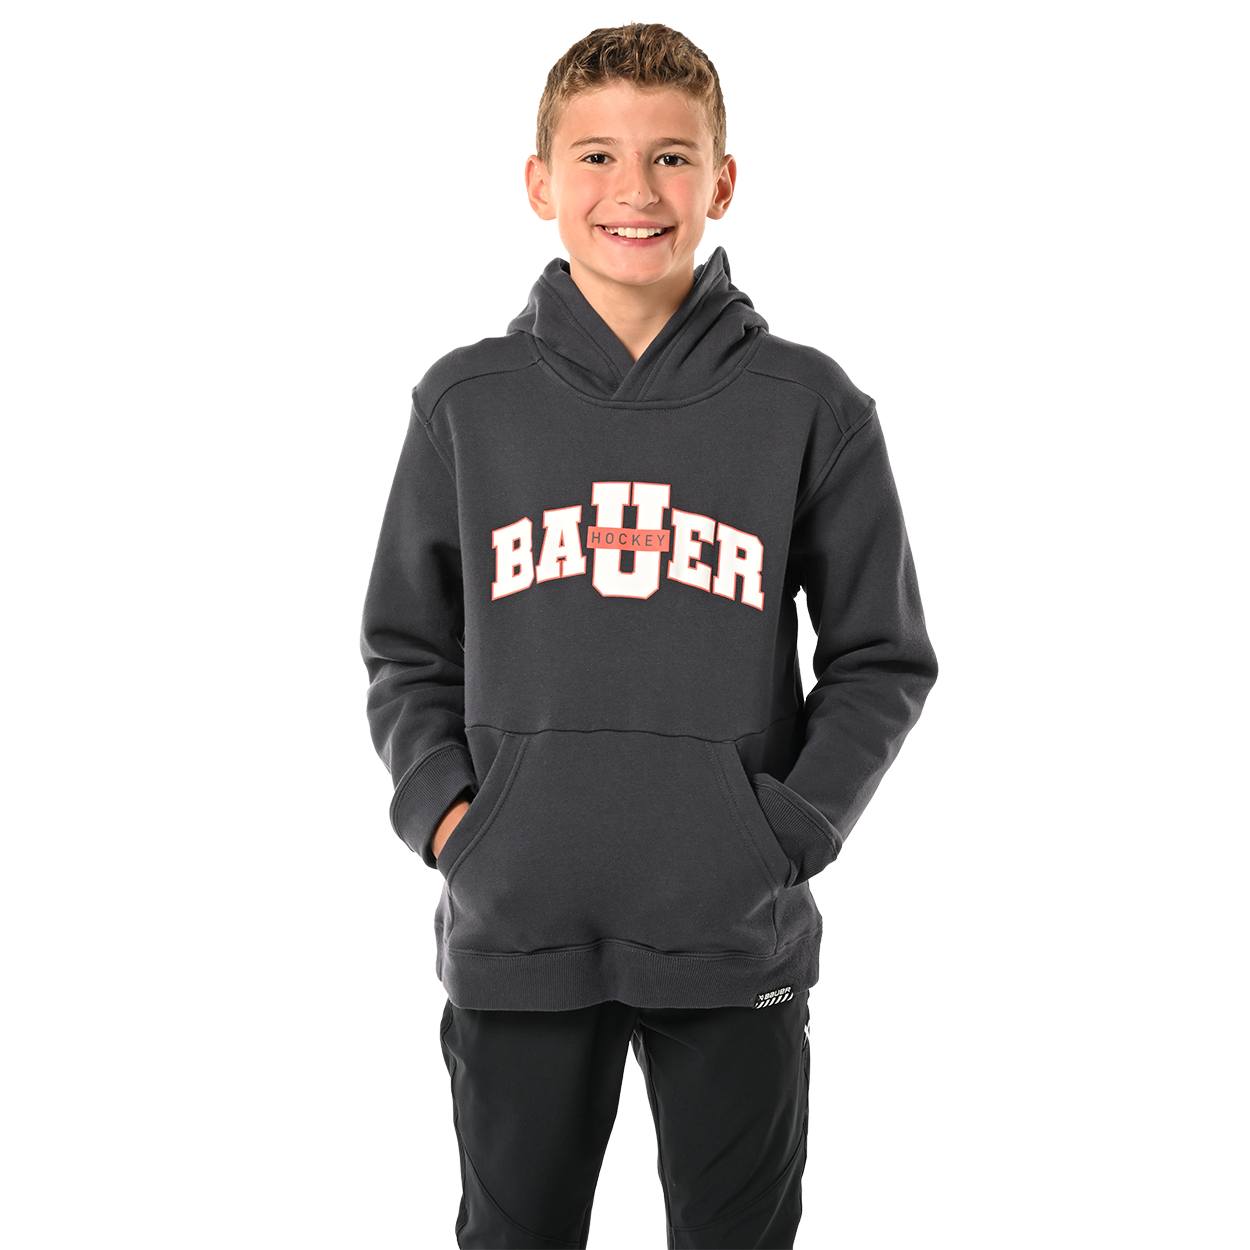 Youth Athletic Clothing & Kids Apparel